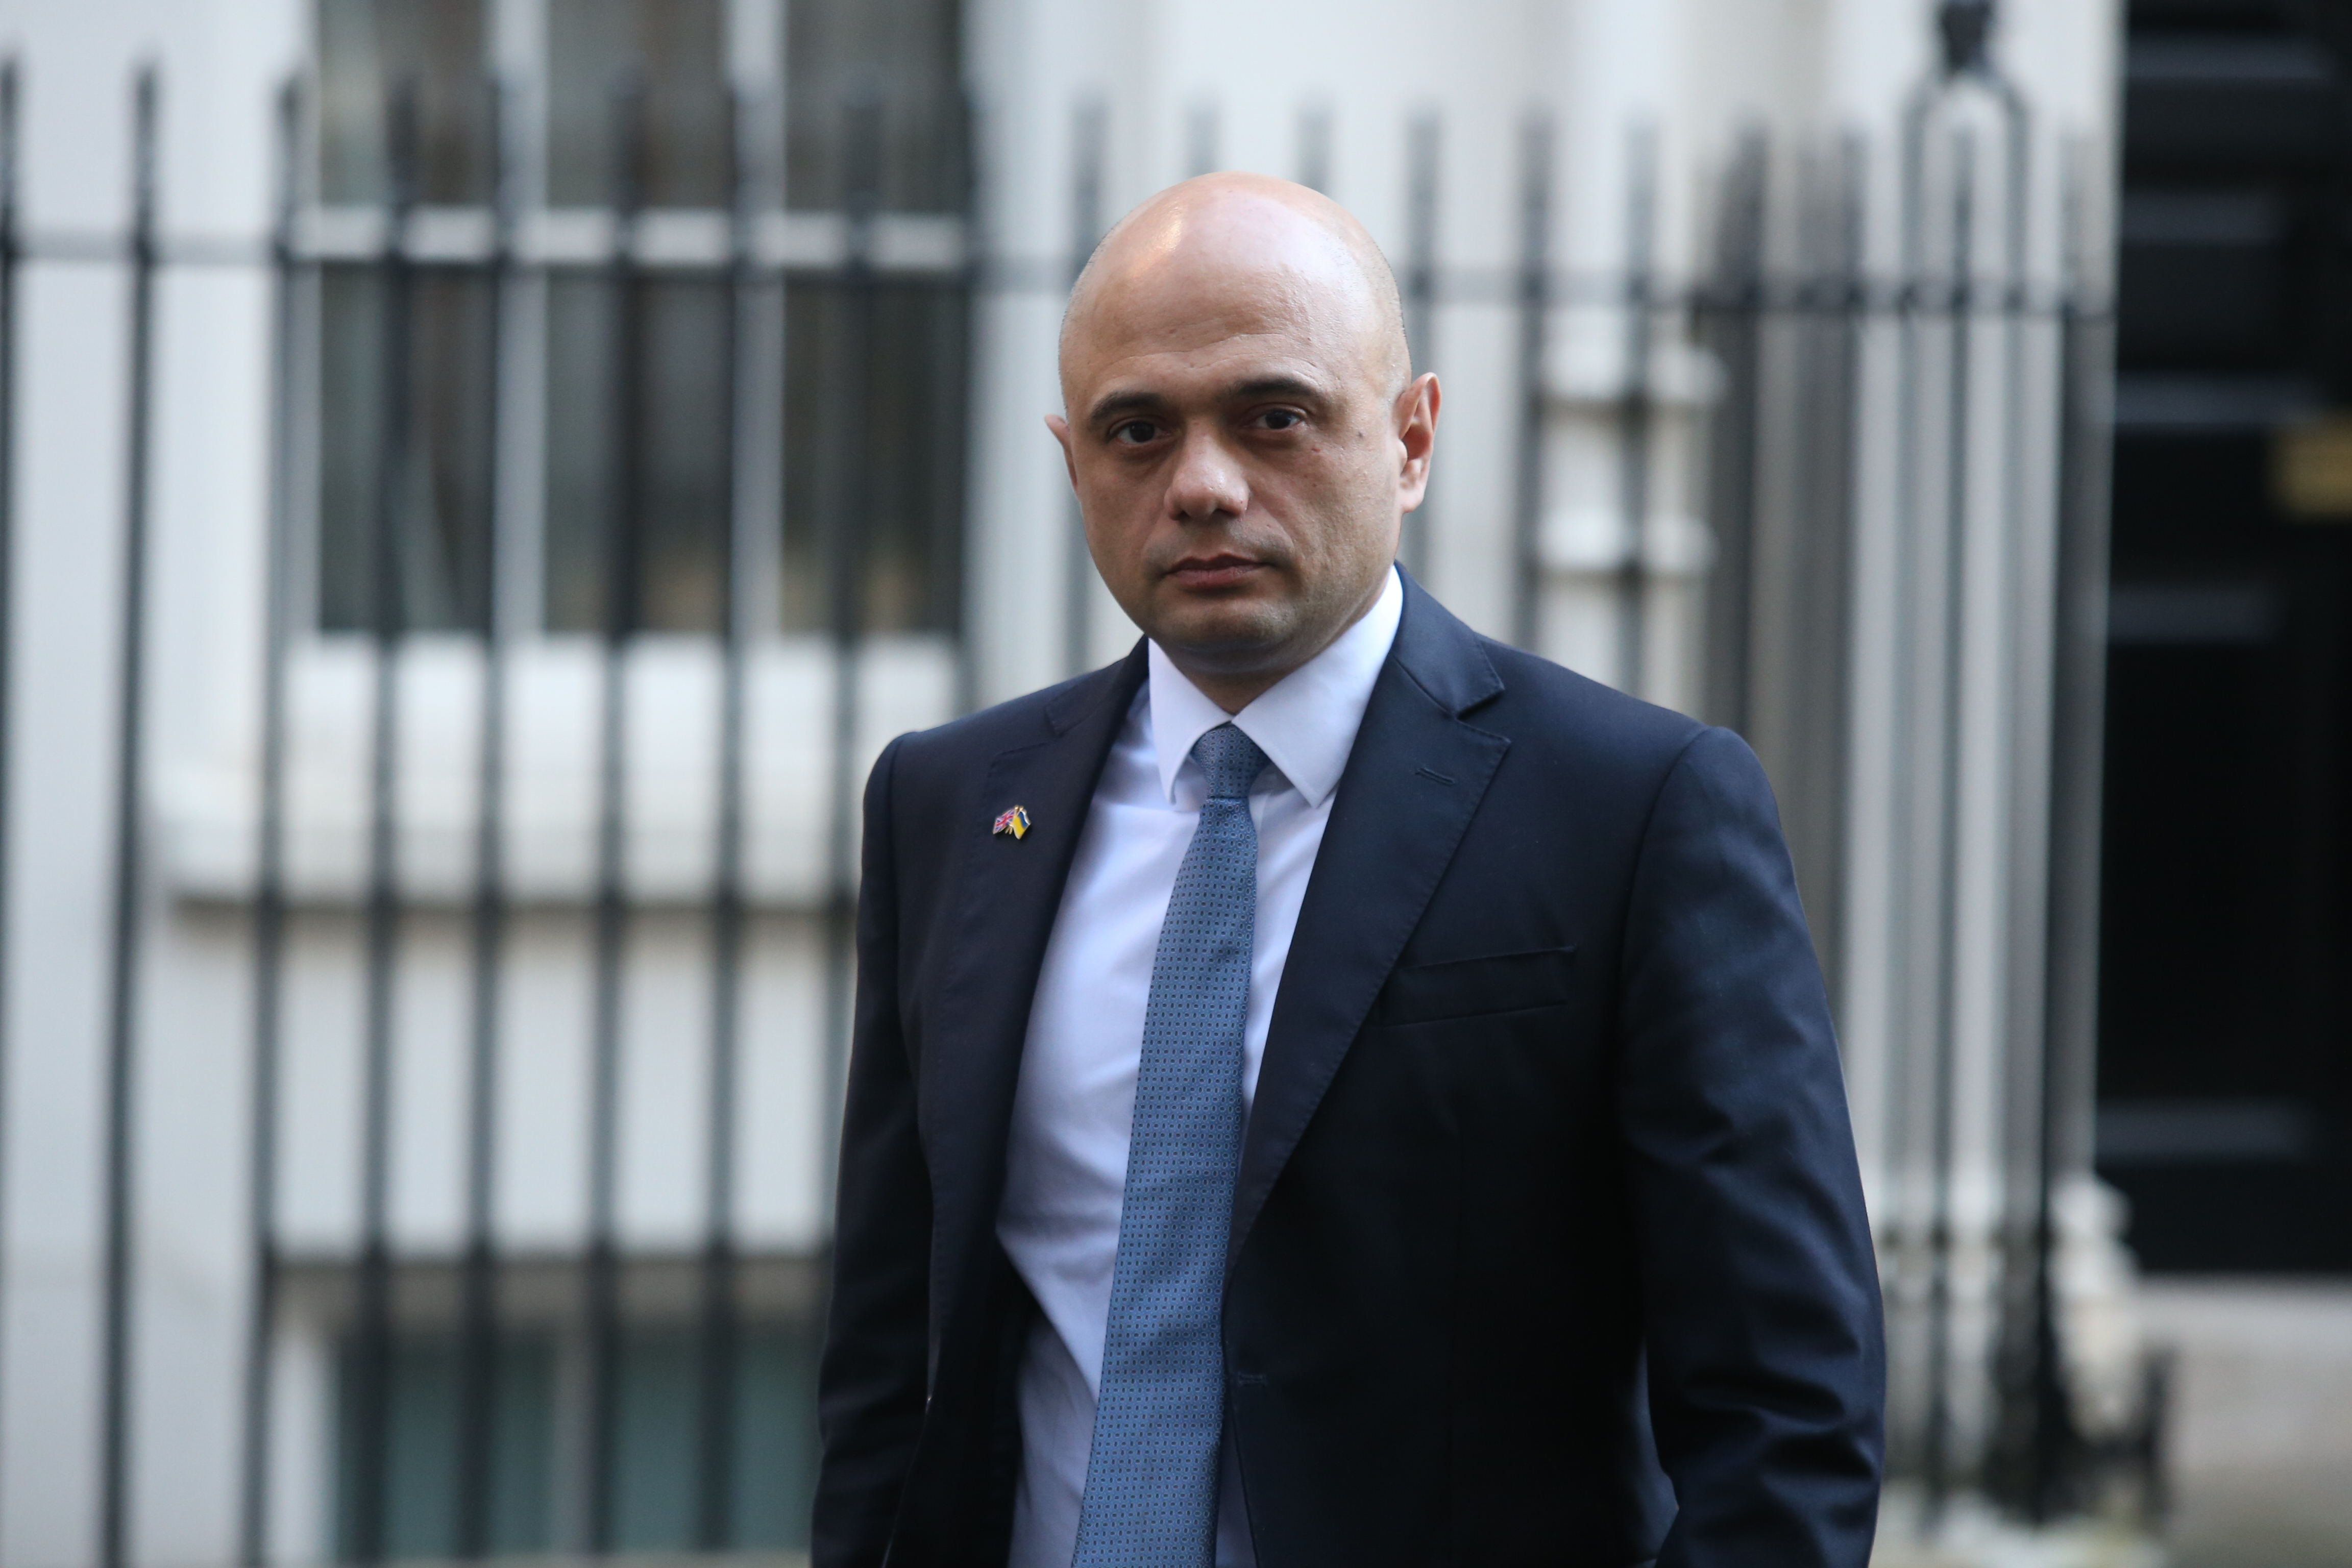 Sajid javid is looking to appoint an hrt tsar amid shortages of the medication